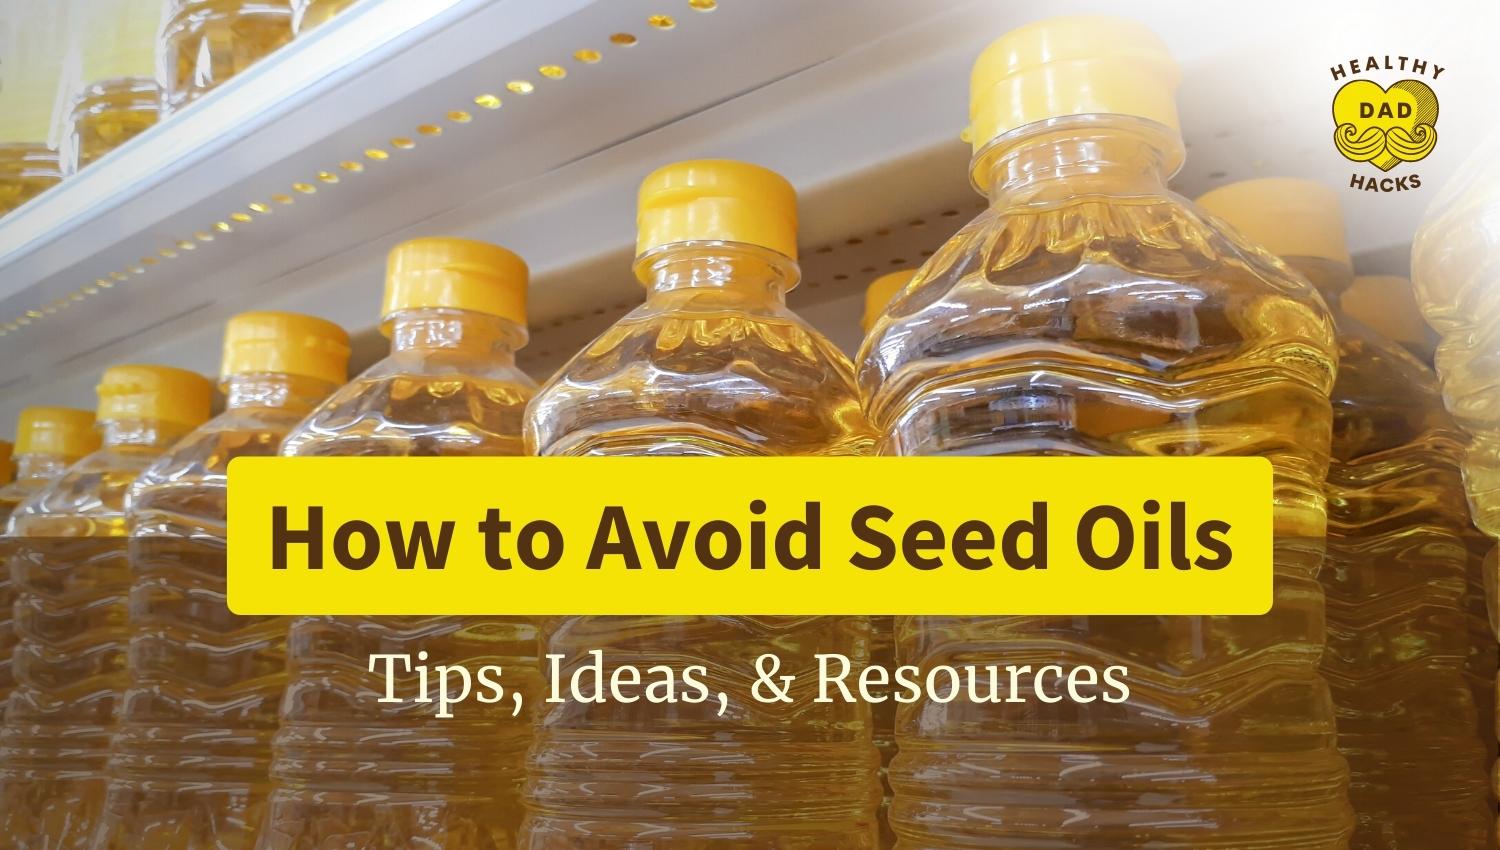 How to avoid seed oils with tips, ideas, resources, and brands to choose